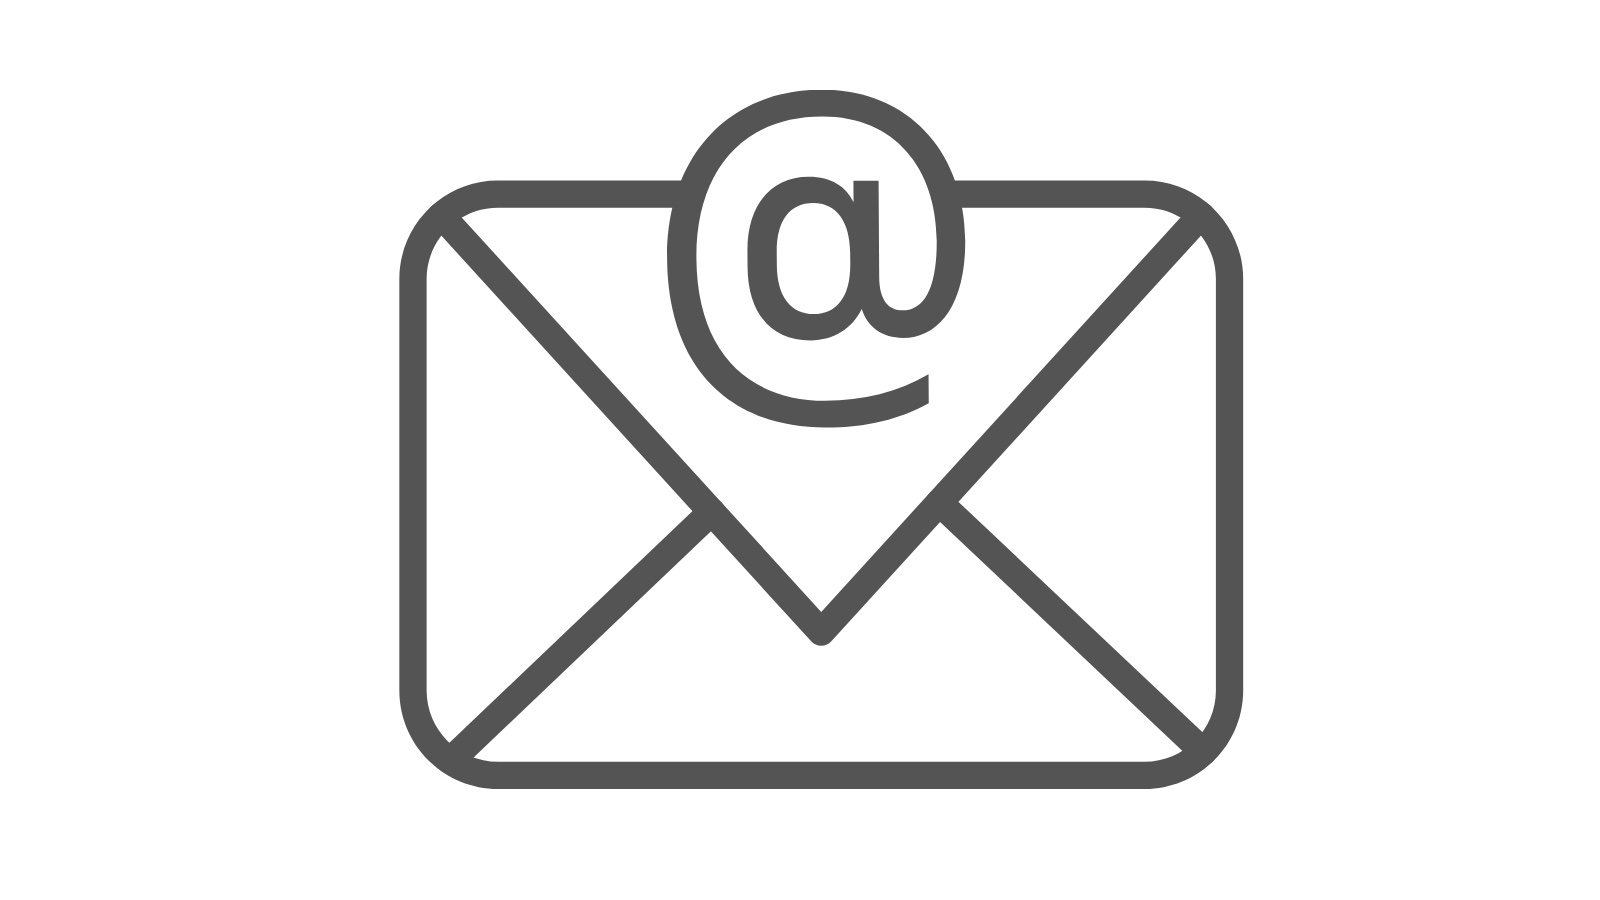 Email for Research Help